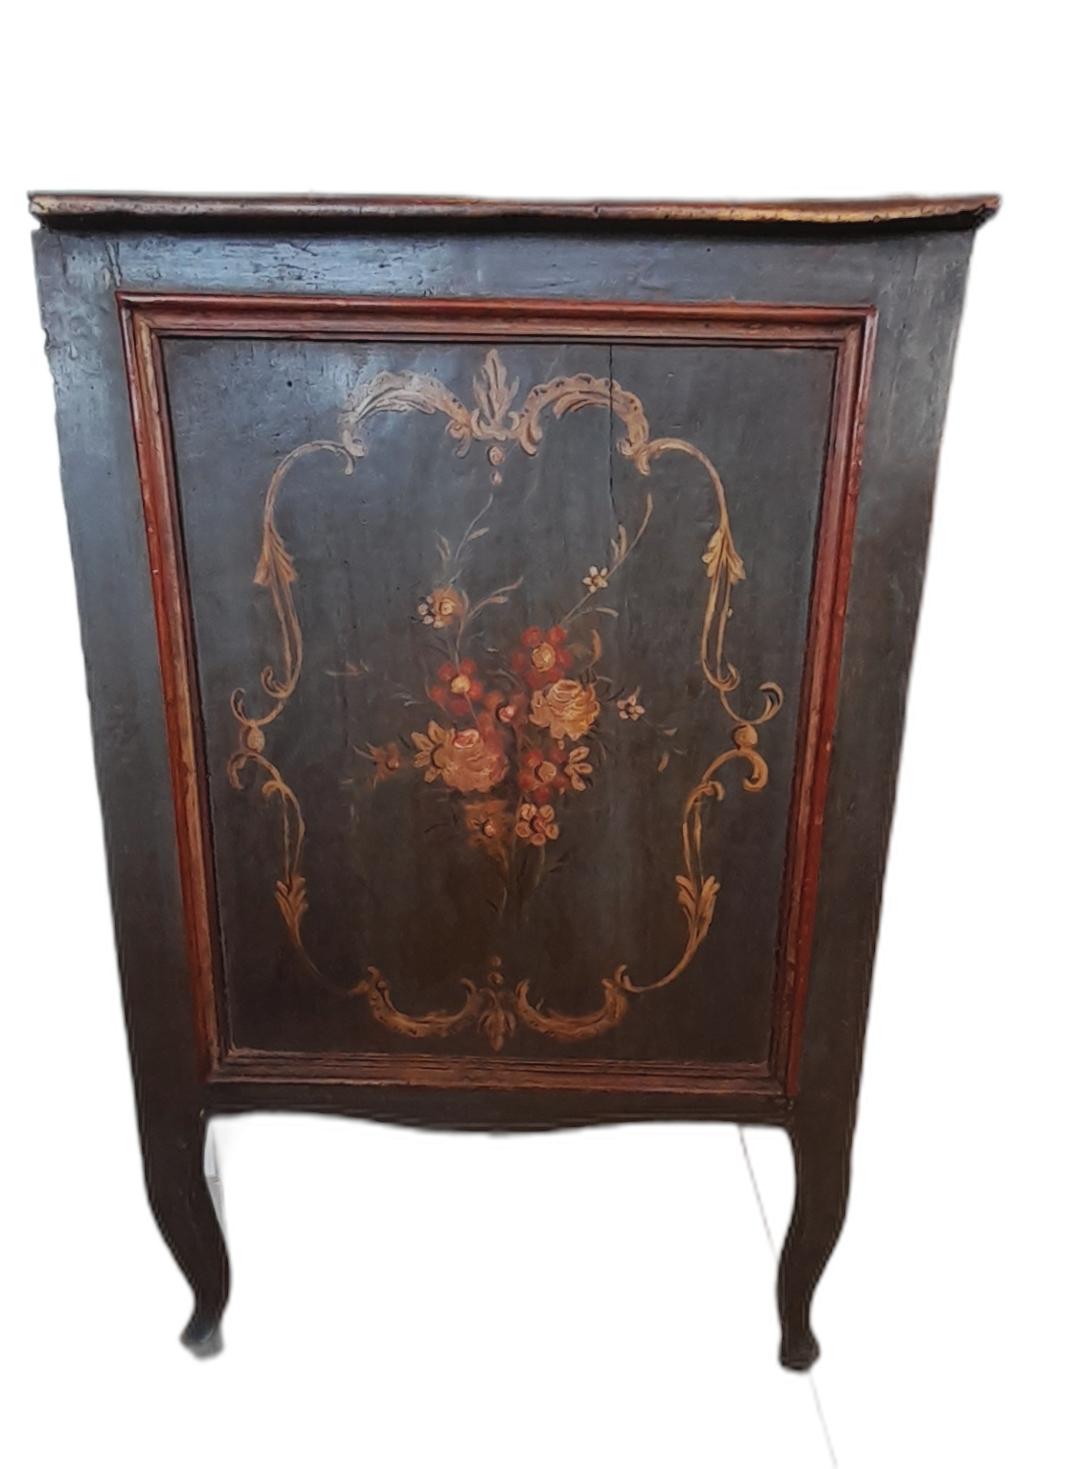 Fully painted dresser of great beauty.
Period: 1700
Italy
Measurements: L. cm 113 - D. cm 60 - H. cm 93 

Contact us for further clarifications or photographic details.

Services: it is possible for us to carry out any type of restoration (complete